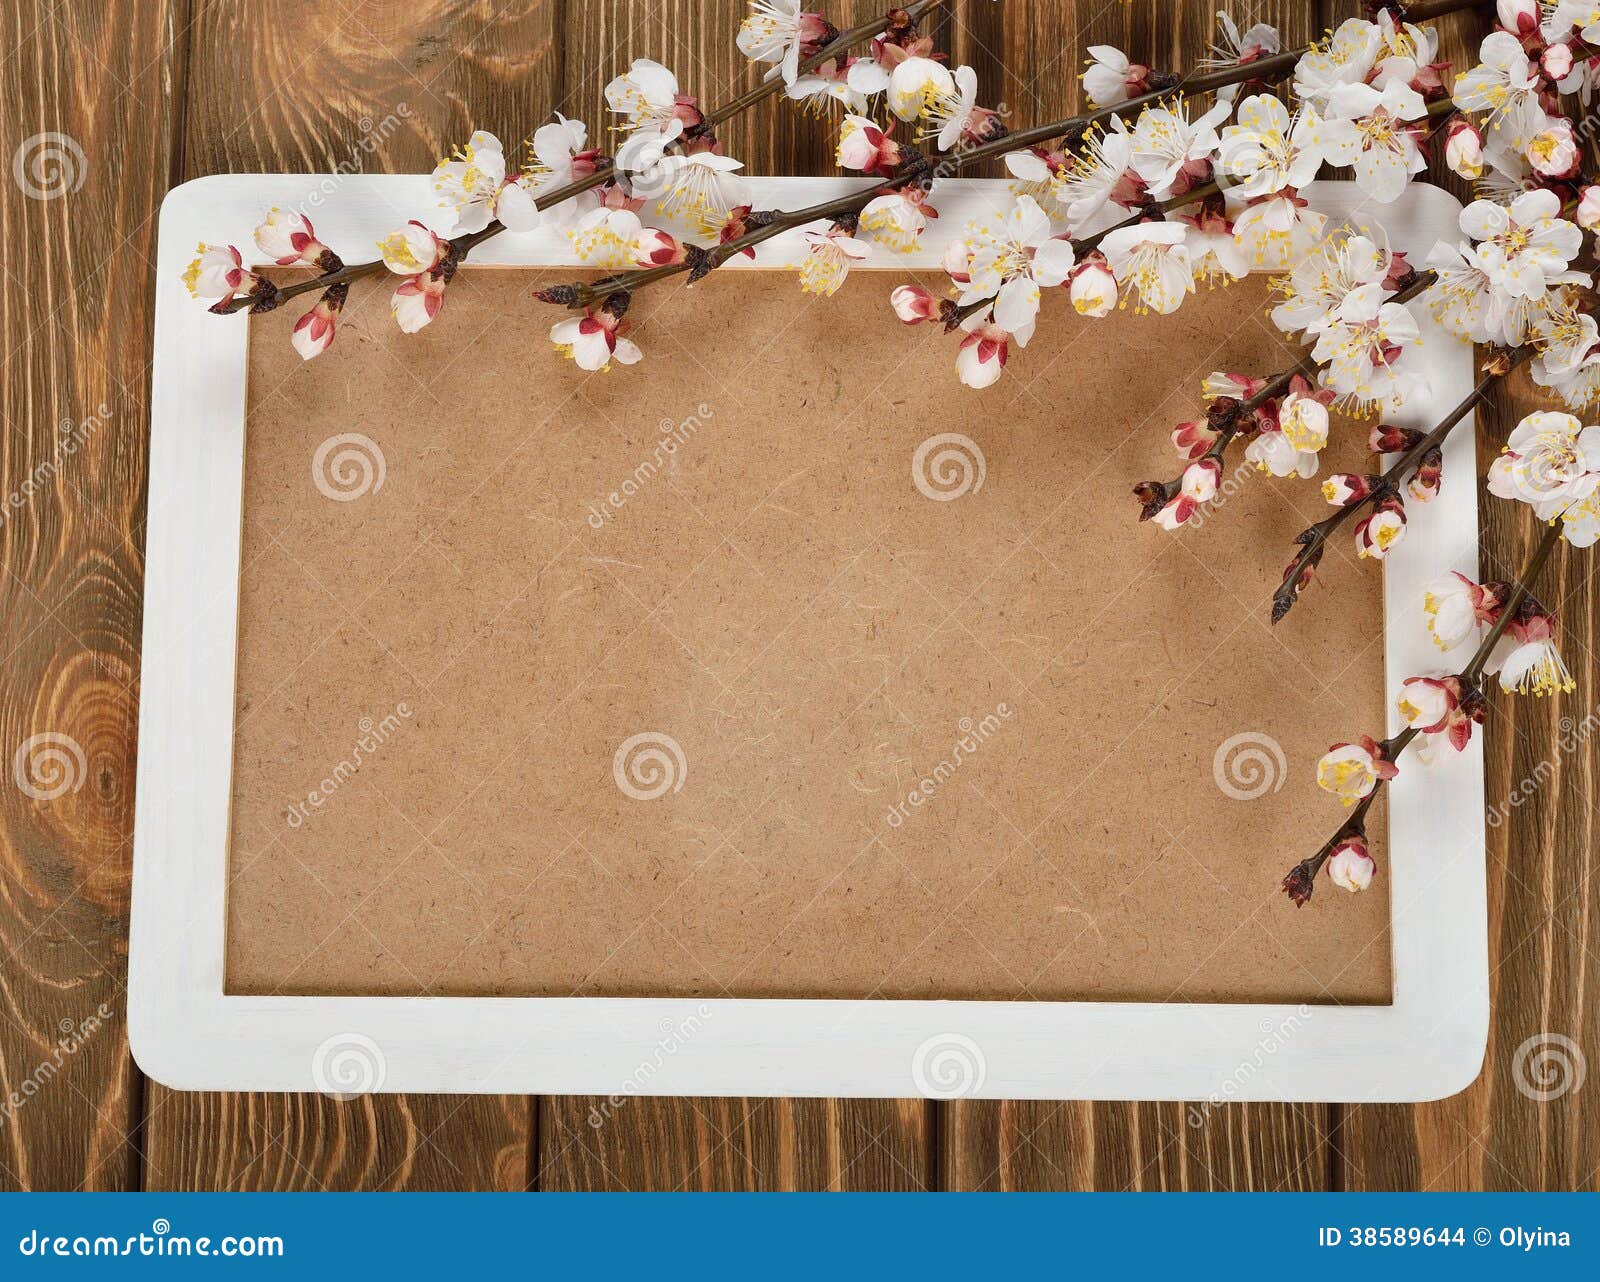 Blossoming branches stock photo. Image of natural, background - 38589644